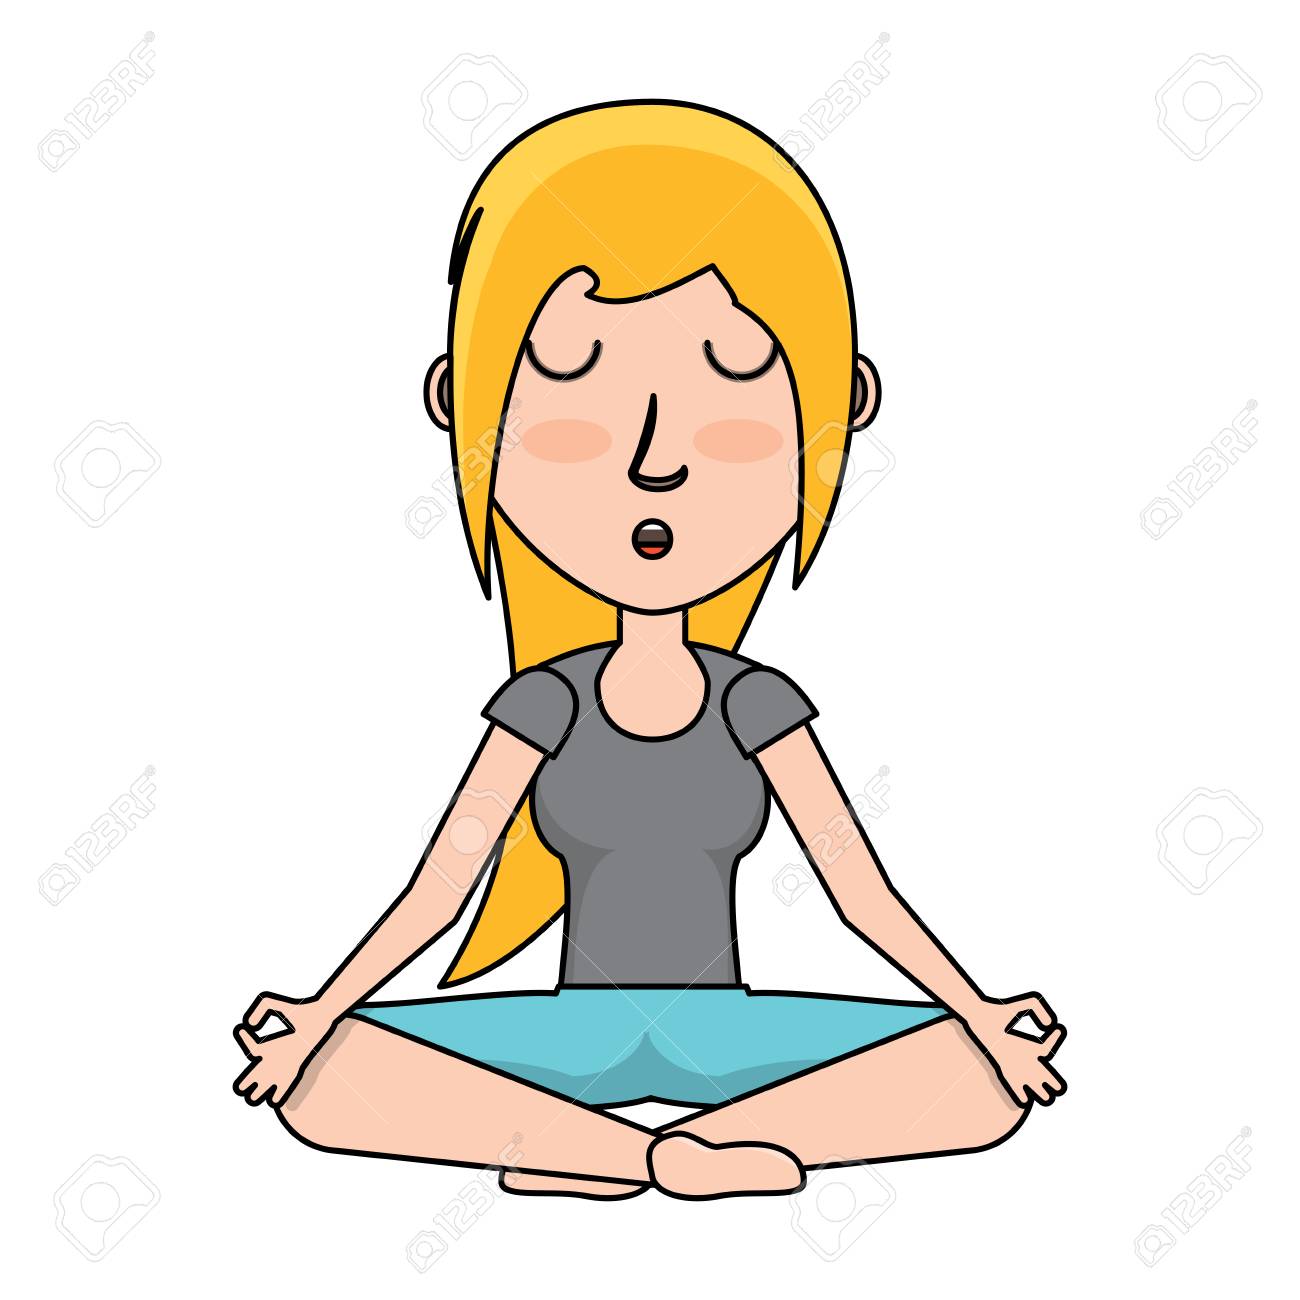 Cartoon Woman Doing Yoga With Lotus Posture Over White Background